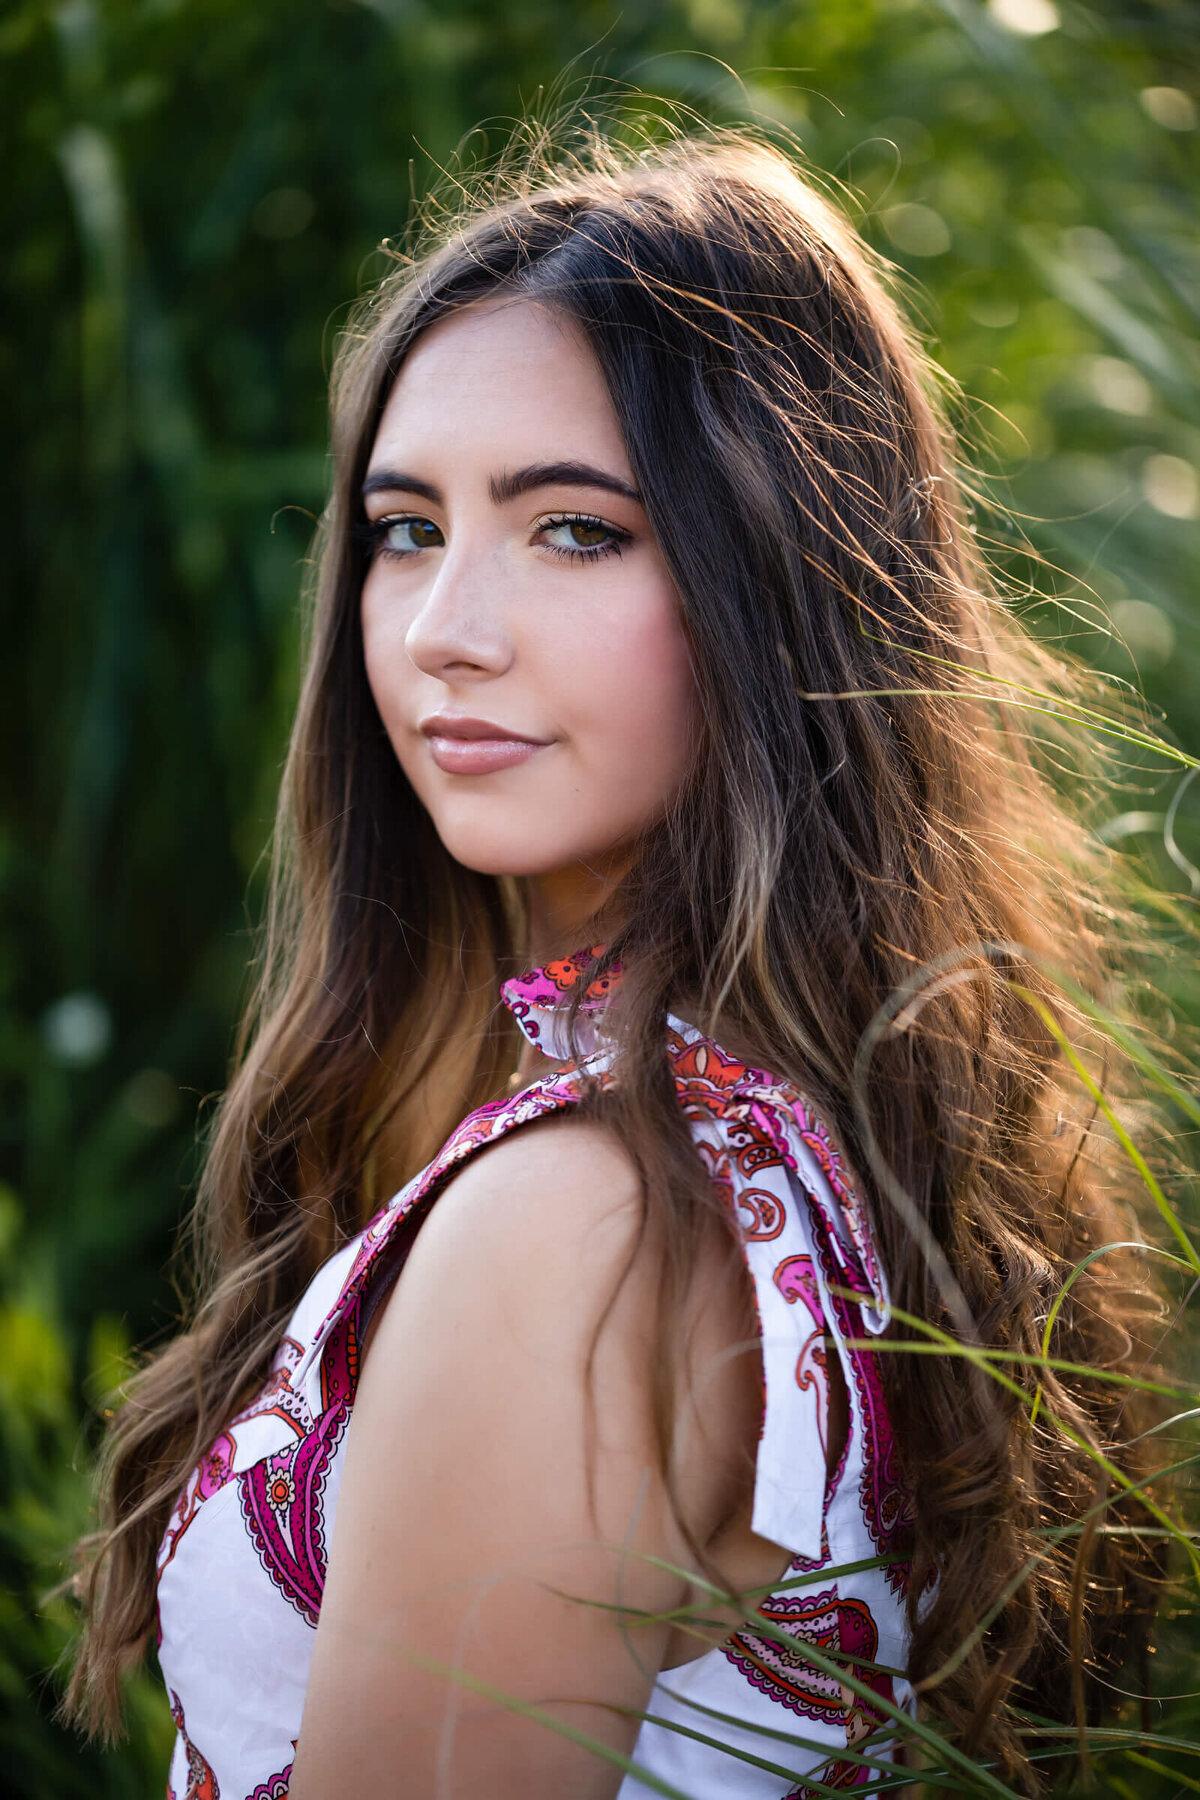 A close up headshot of a high school senior girl with long brunette hair looks over her shoulder at the camera. Captured by Springfield senior photographer Dynae Levingston.